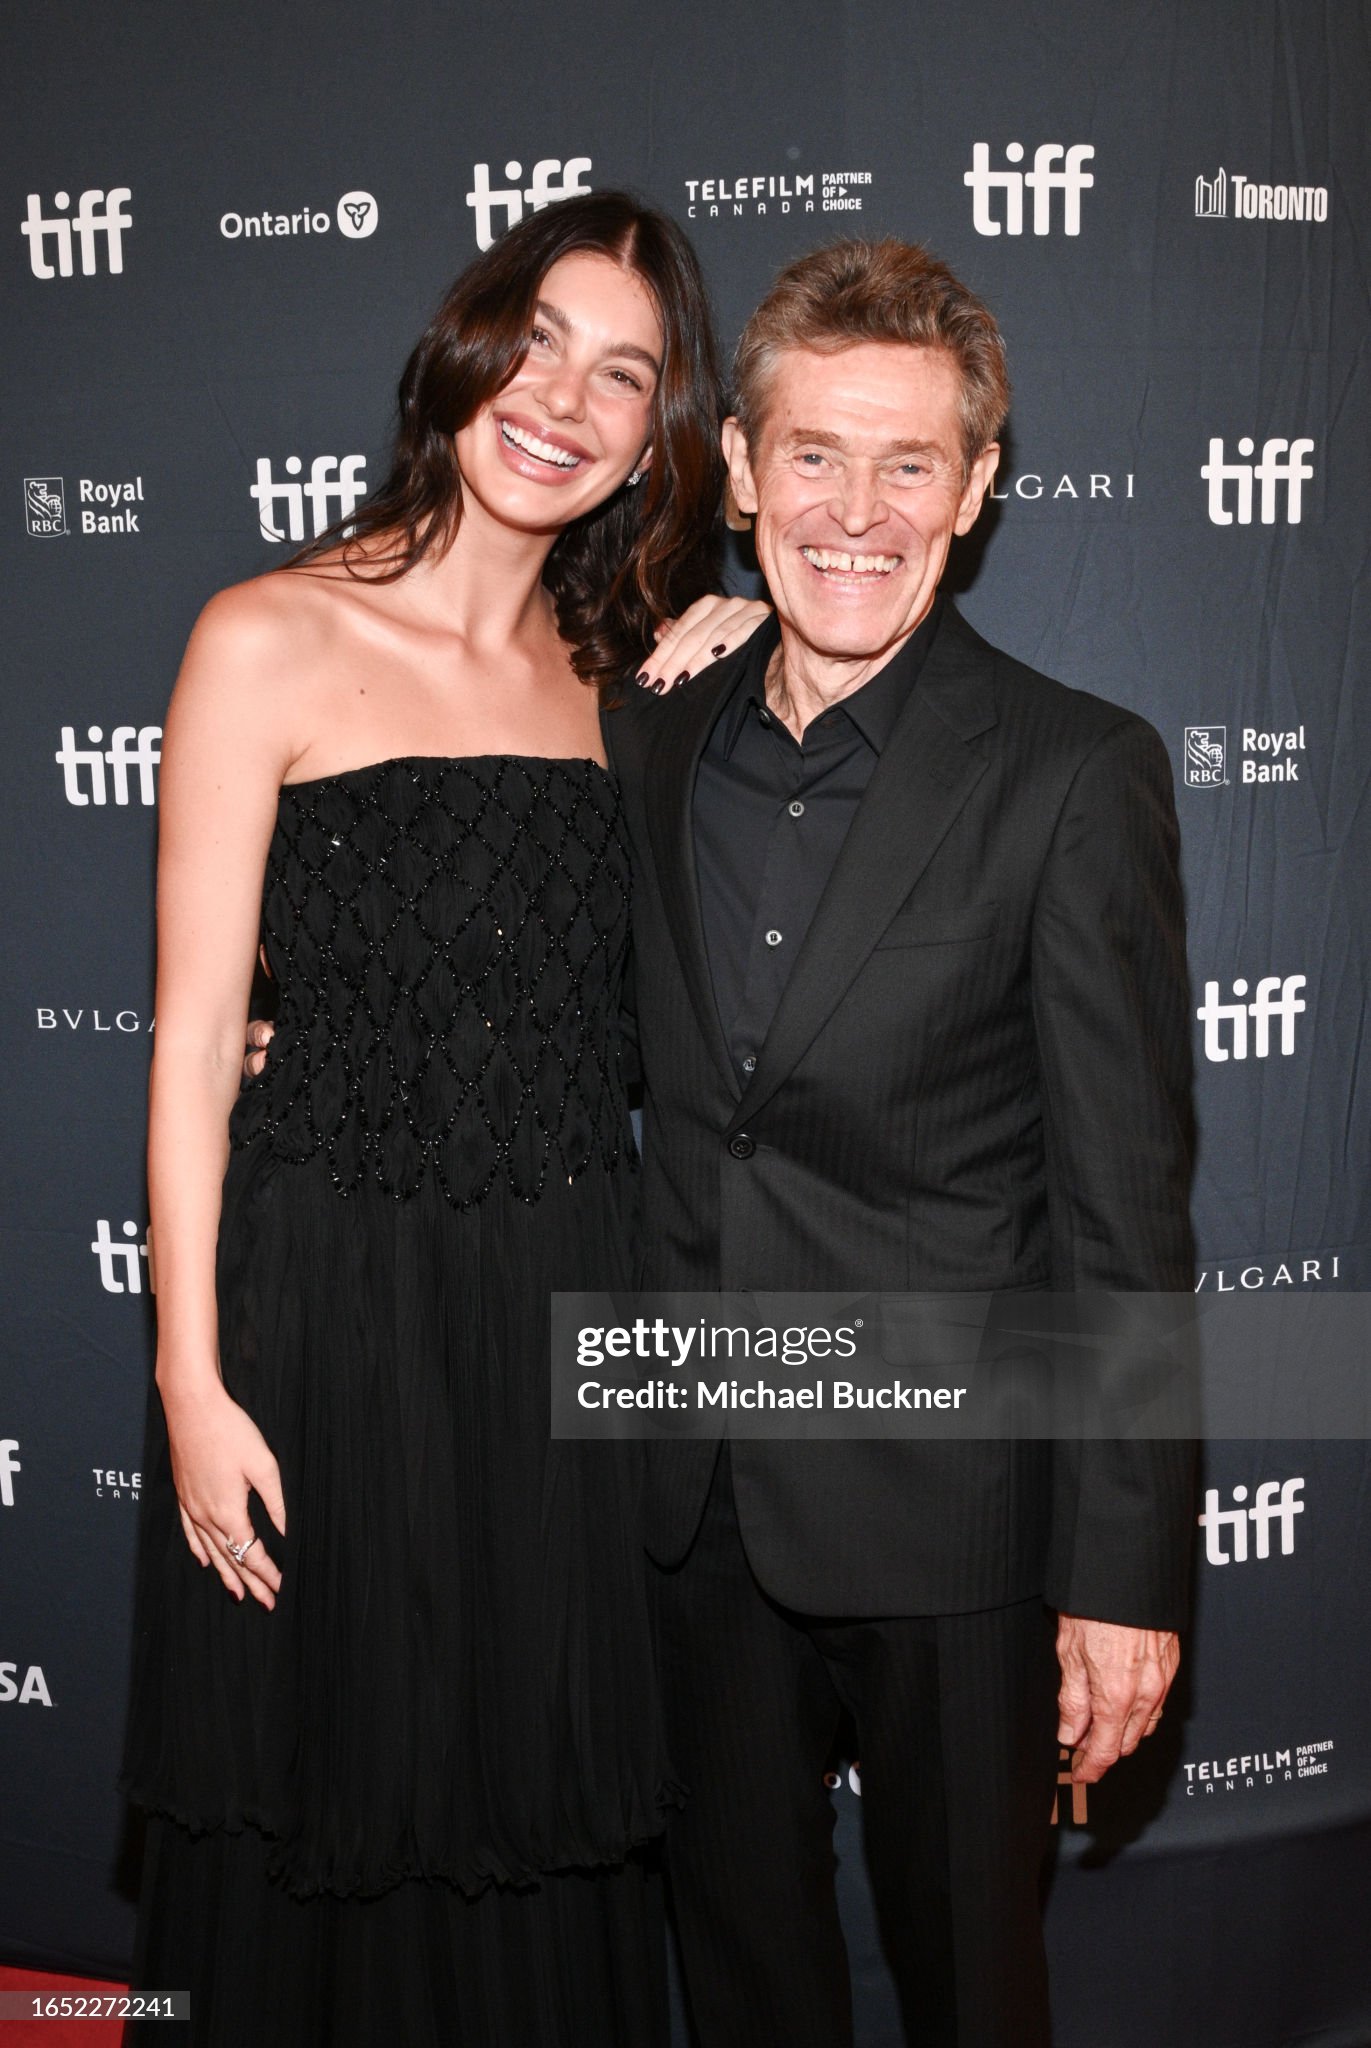 camila-morrone-and-willem-dafoe-at-the-g